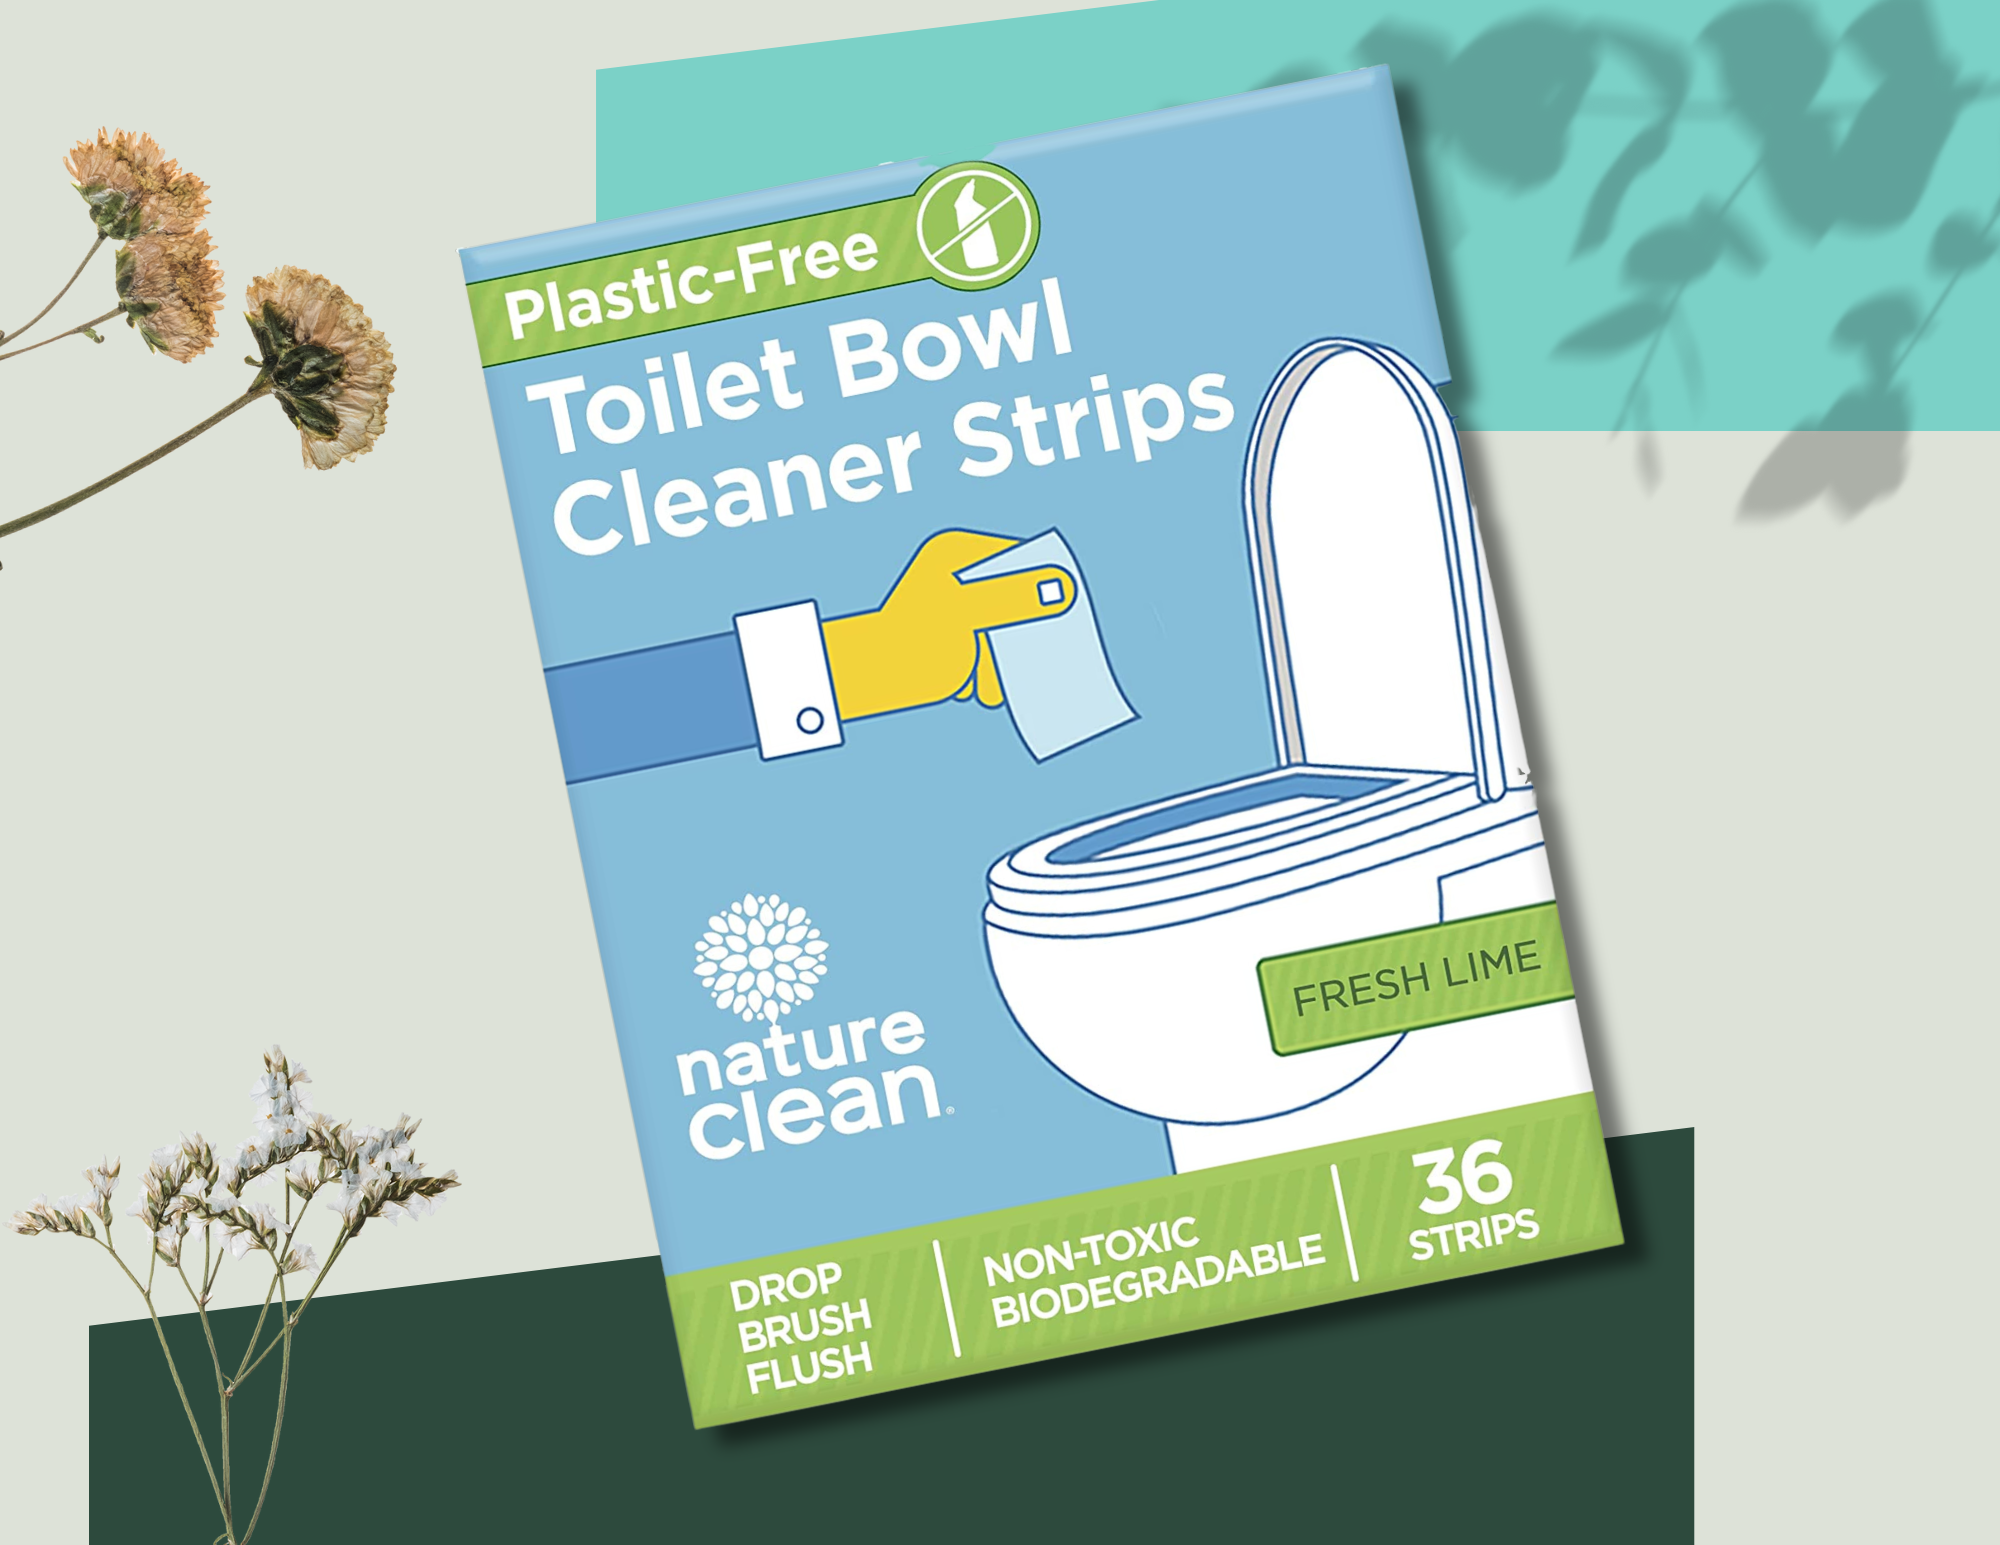 Nature Clean Toilet Bowel Strips | Green, Plastic-Free Eco-friendly Toilet Bowl Cleaner 